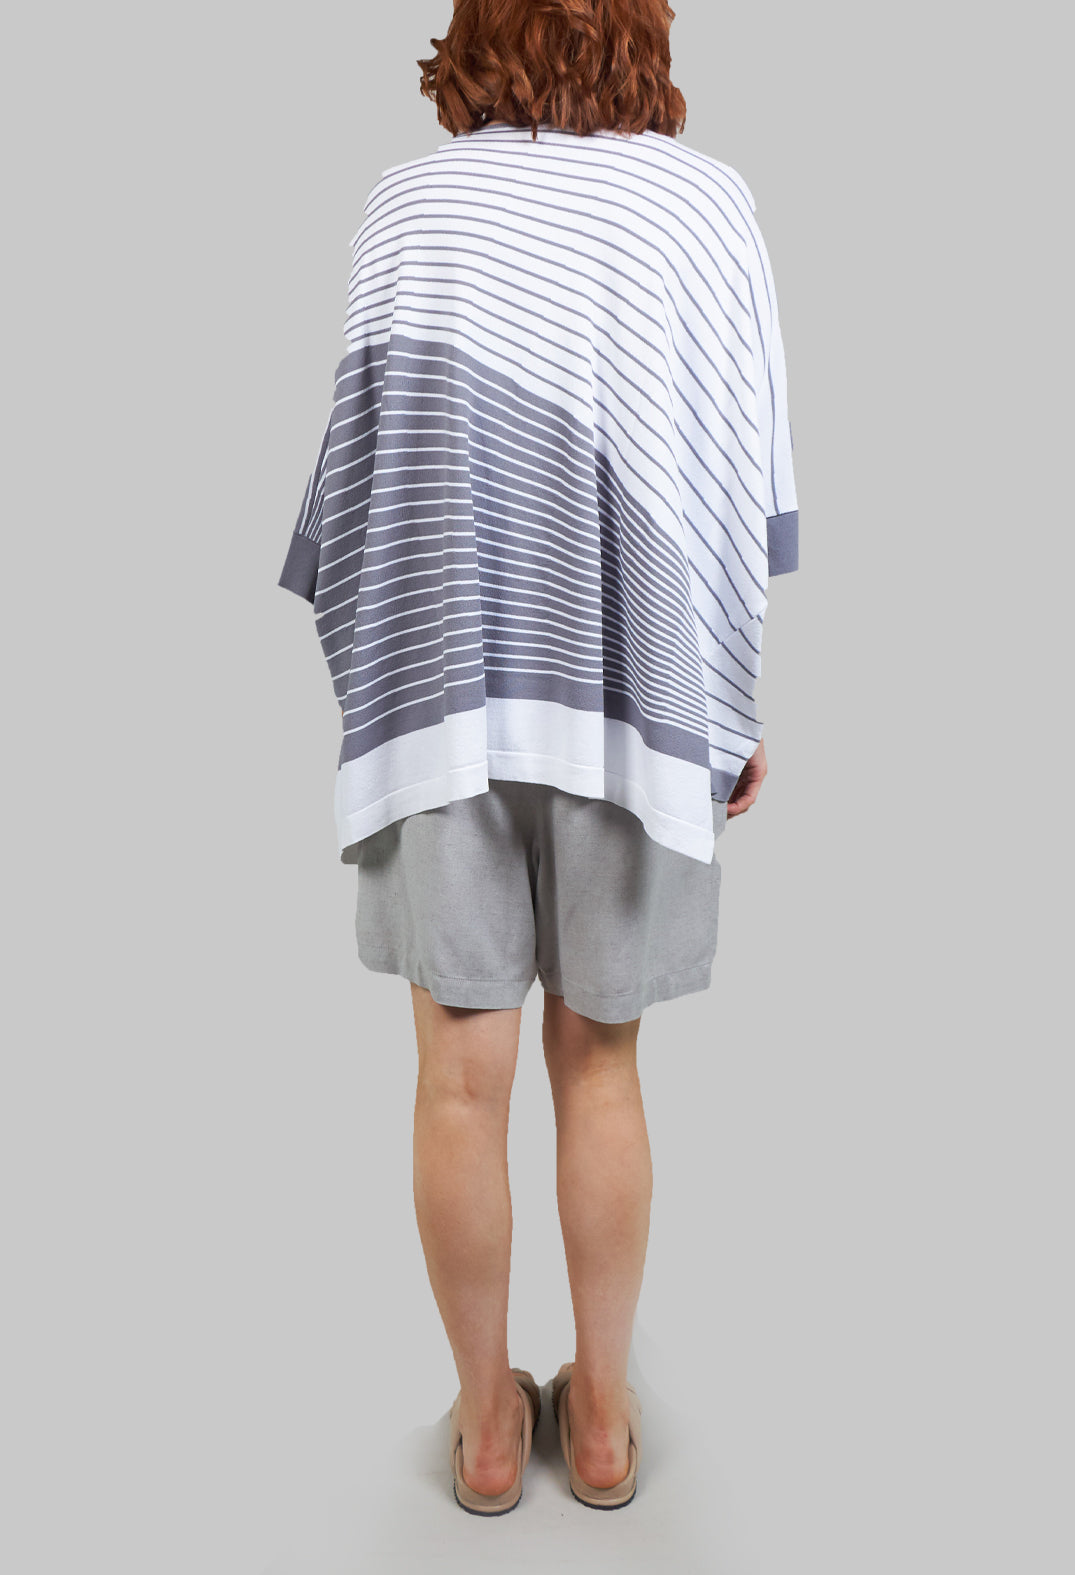 Striped Batwing Jumper in Grey and White